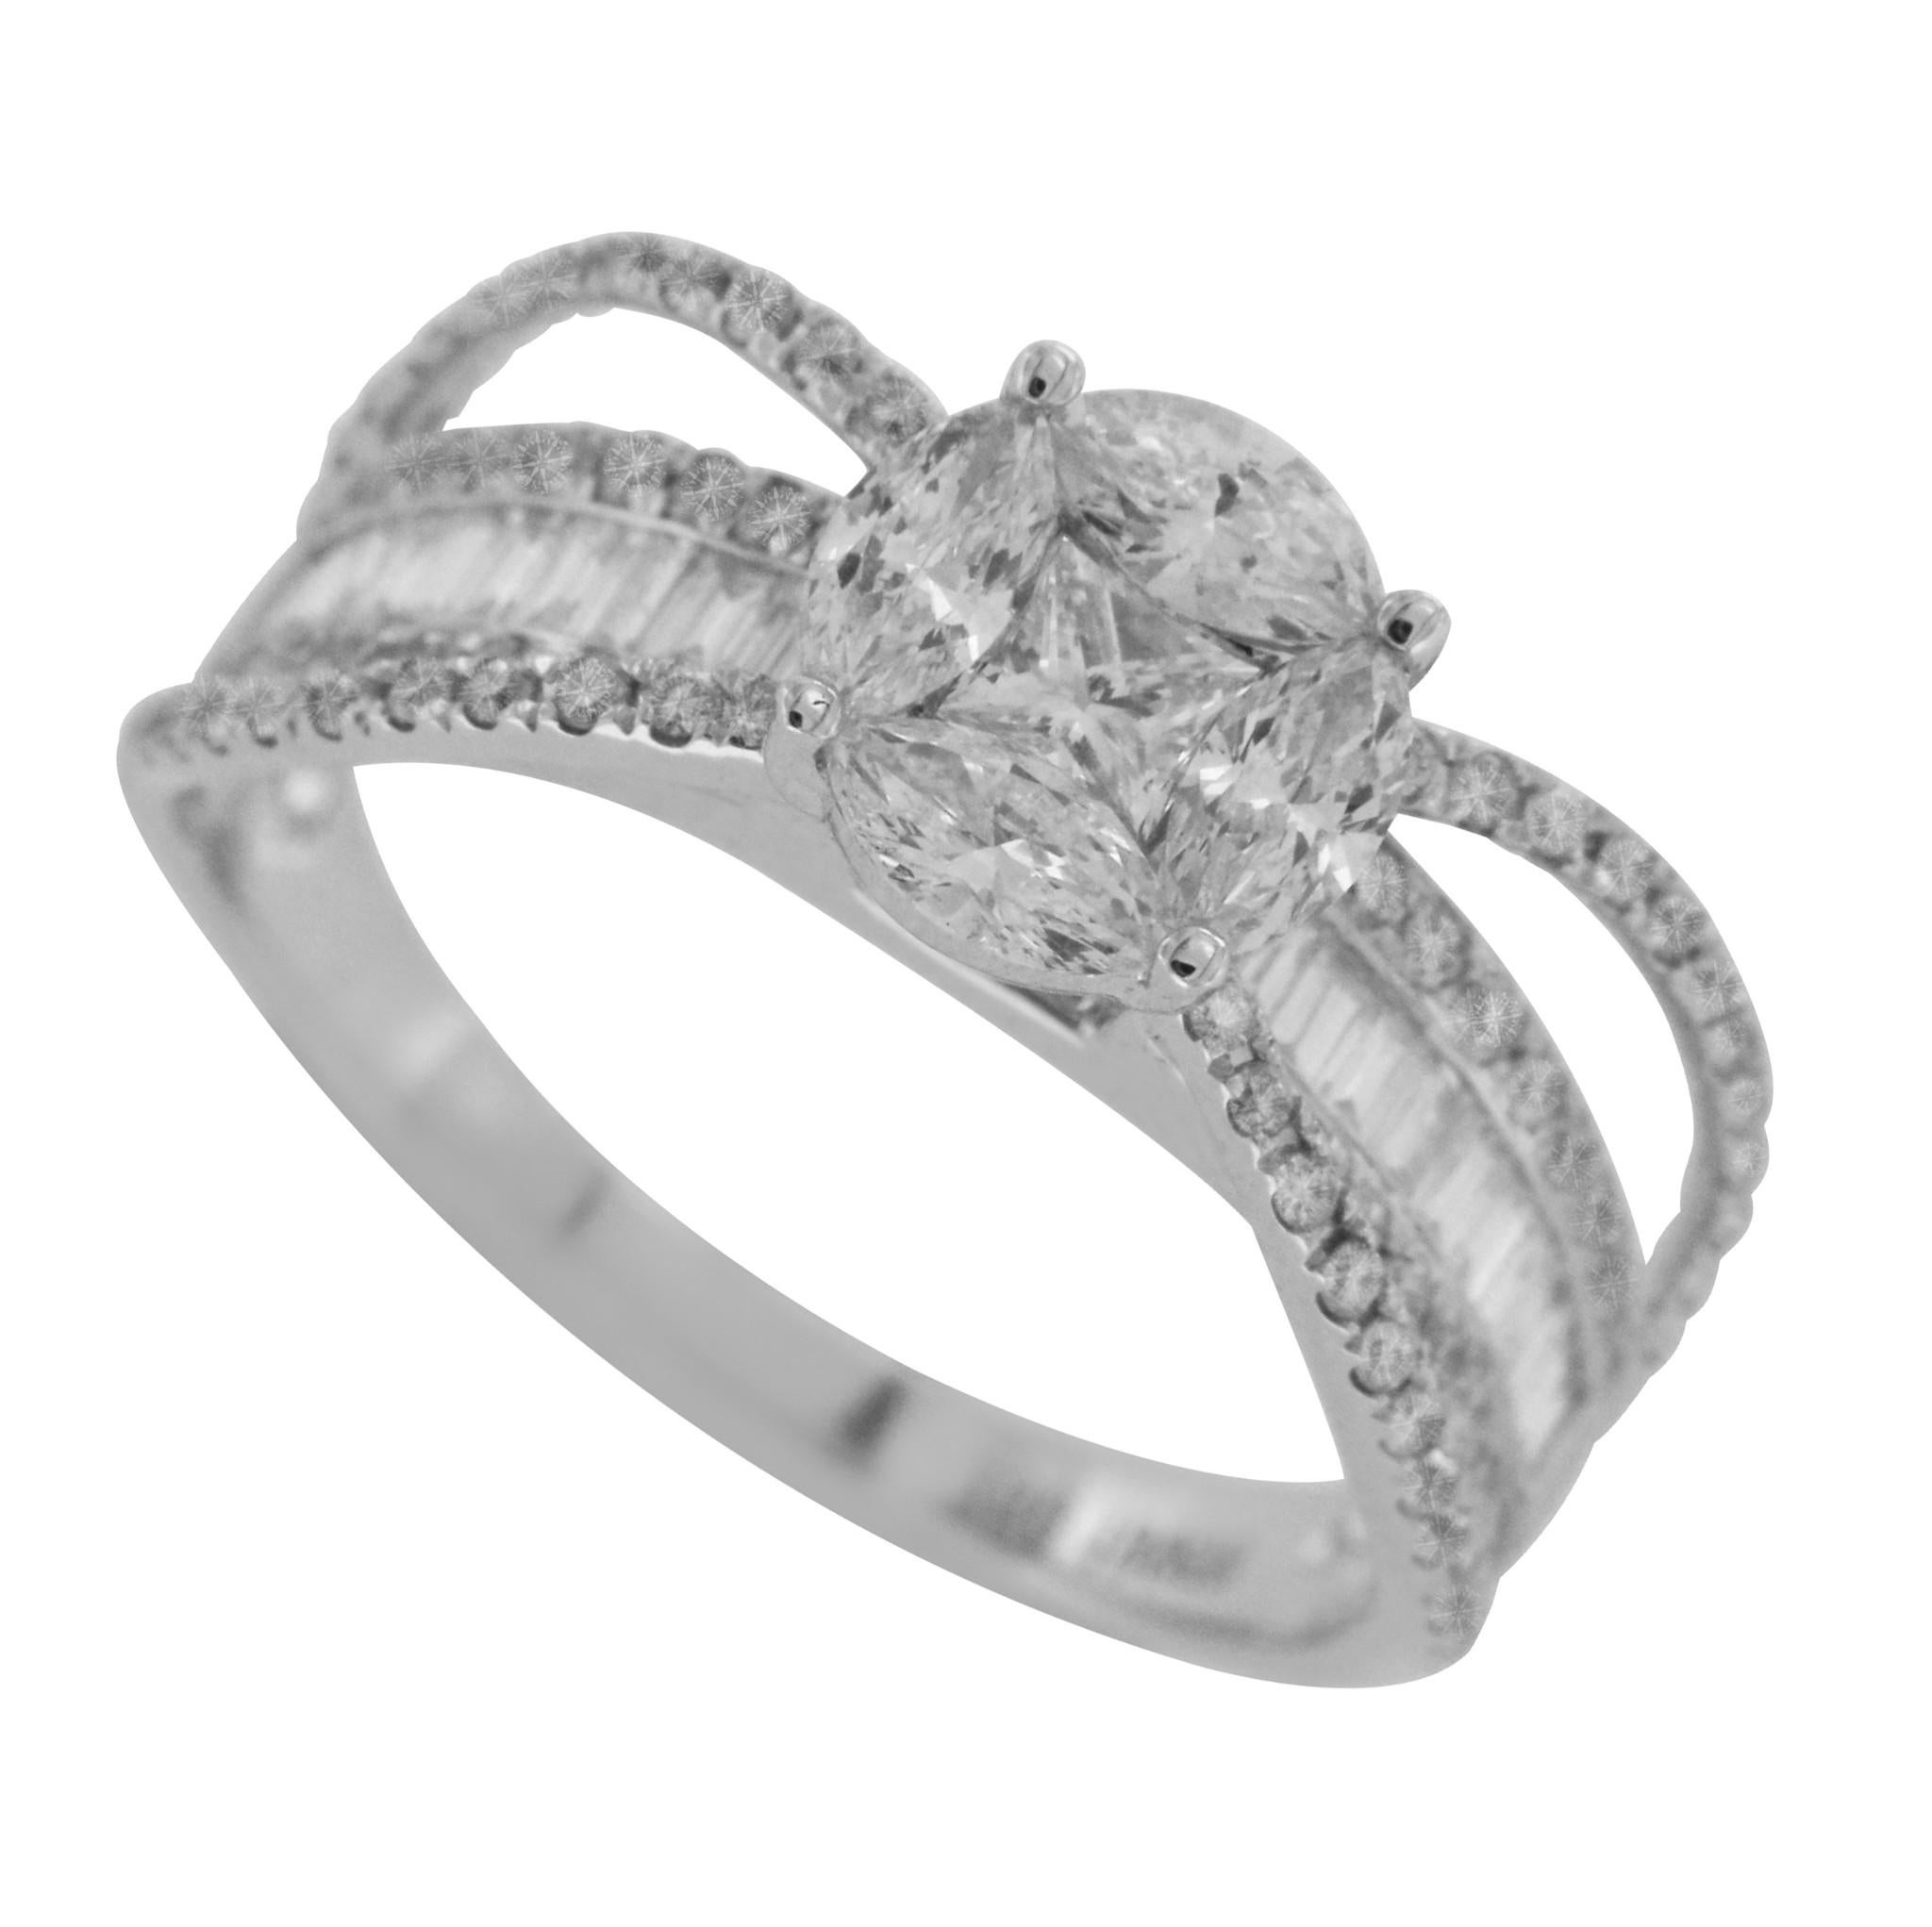 Type: Ring
Top: 7.5 mm
Band Width: 2 mm 
Metal: White Gold 
Metal Purity: 18K
Hallmarks: 750
Total Weight: 4.16 Gram
Size: 6
Condition: Per-Owned
Stone Type: 1.23 CT G VS2 Diamonds